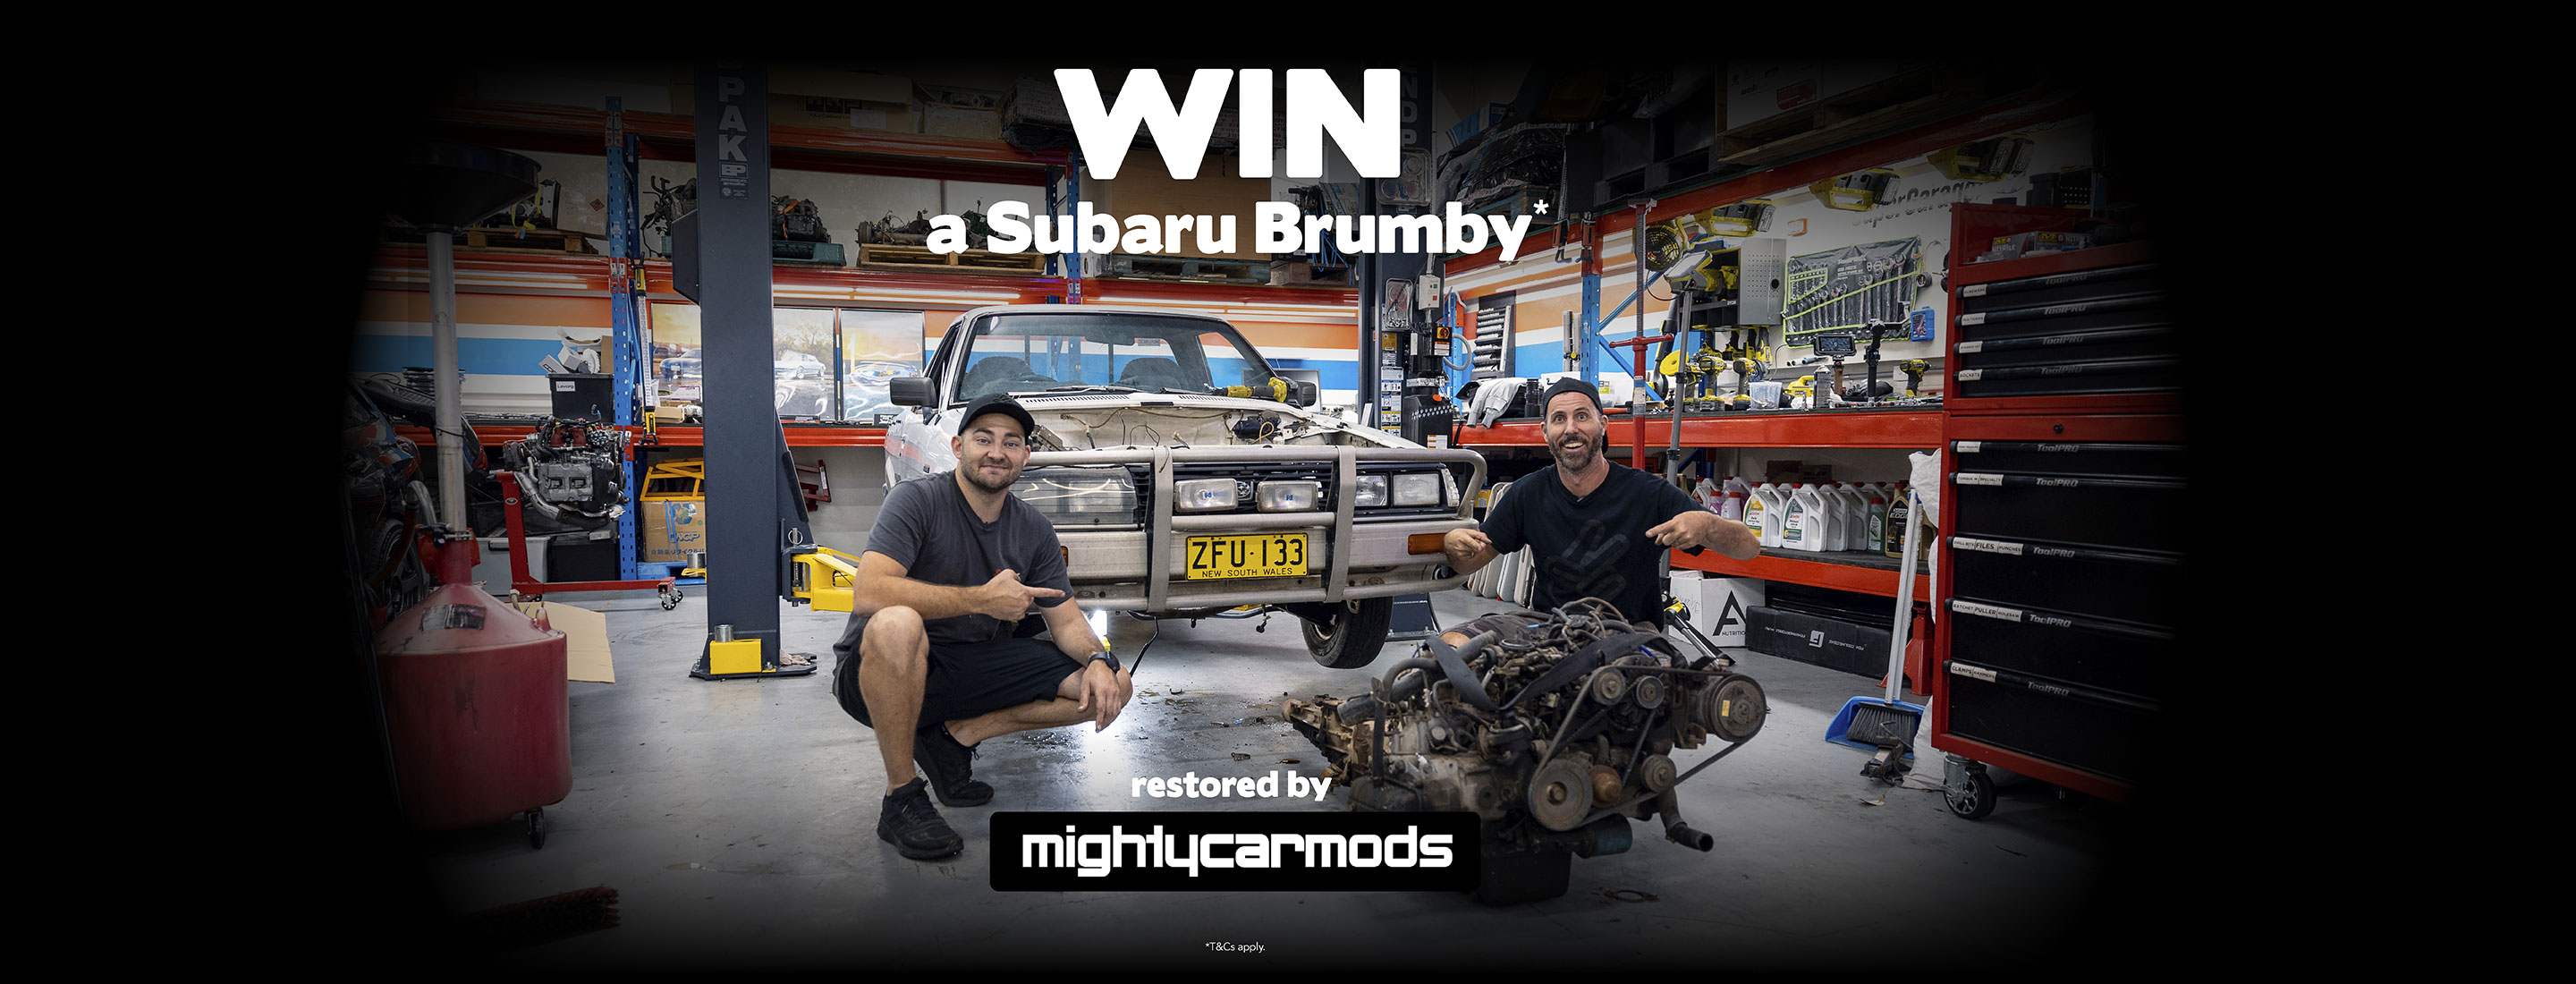 Subaru Australia joins forces with YouTube sensations Mighty Car Mods to restore classic Brumby for road safety awareness